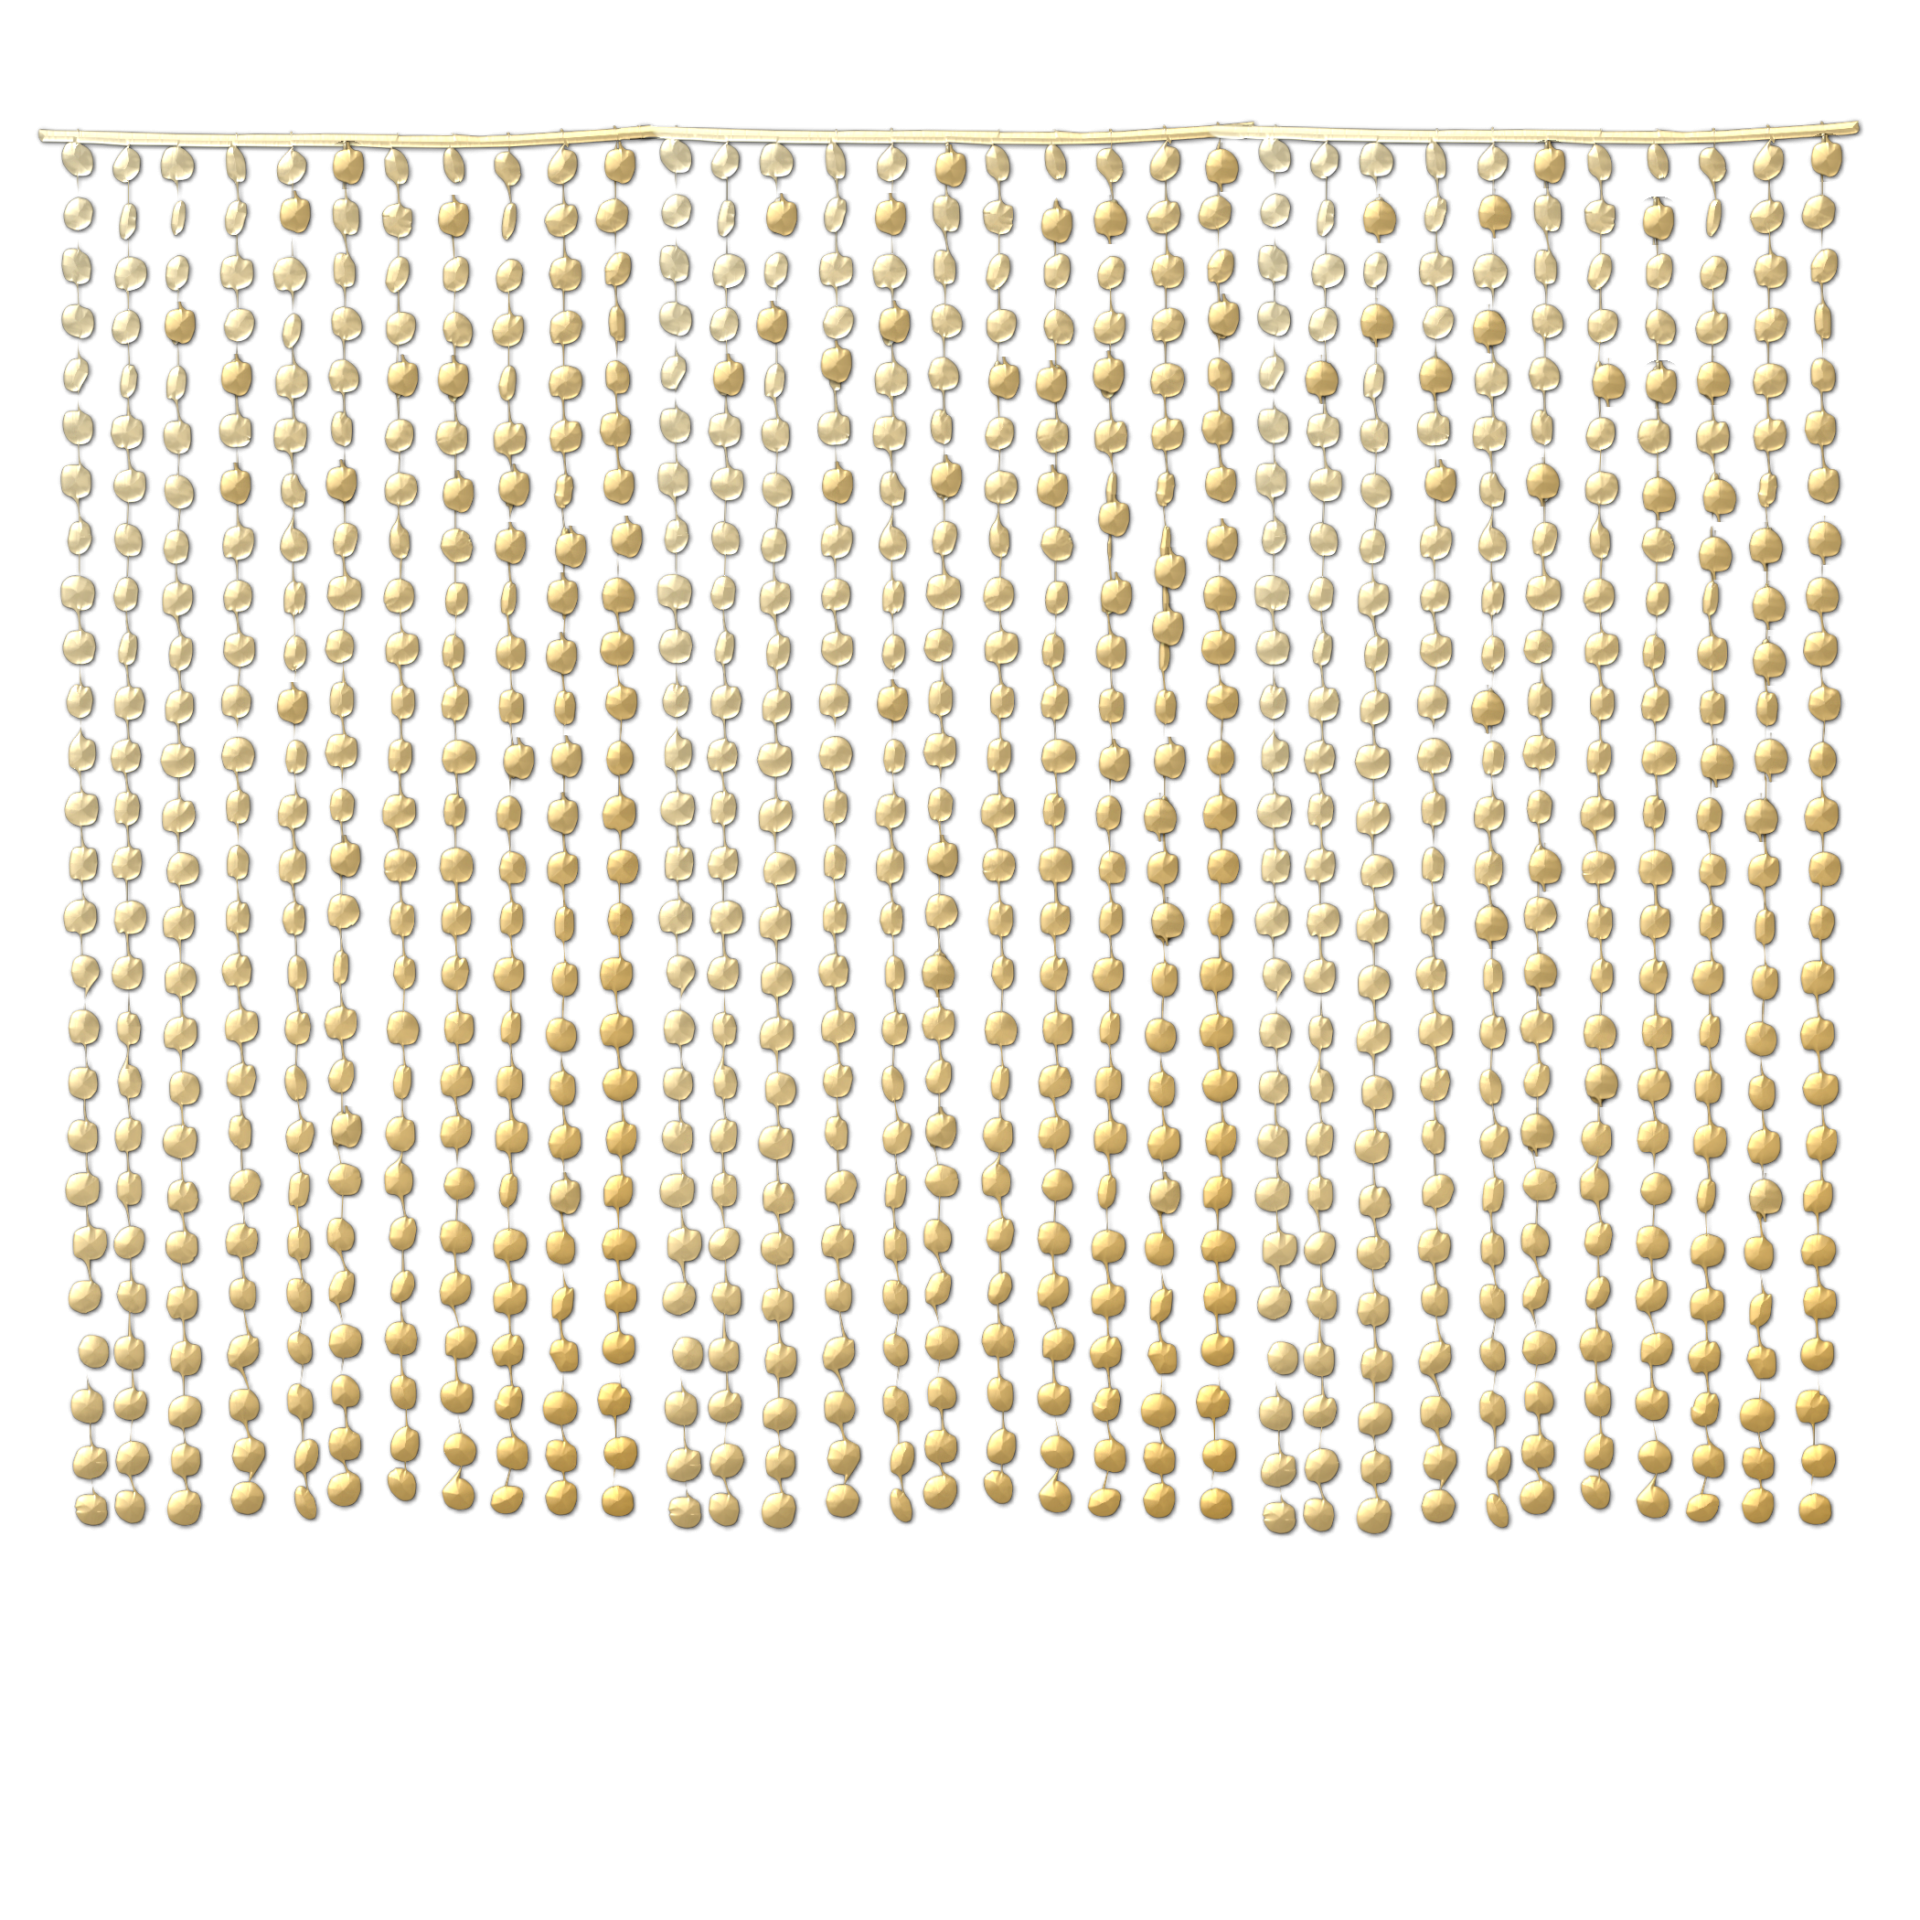 Curtain of golden pearls for scrapbooking or other